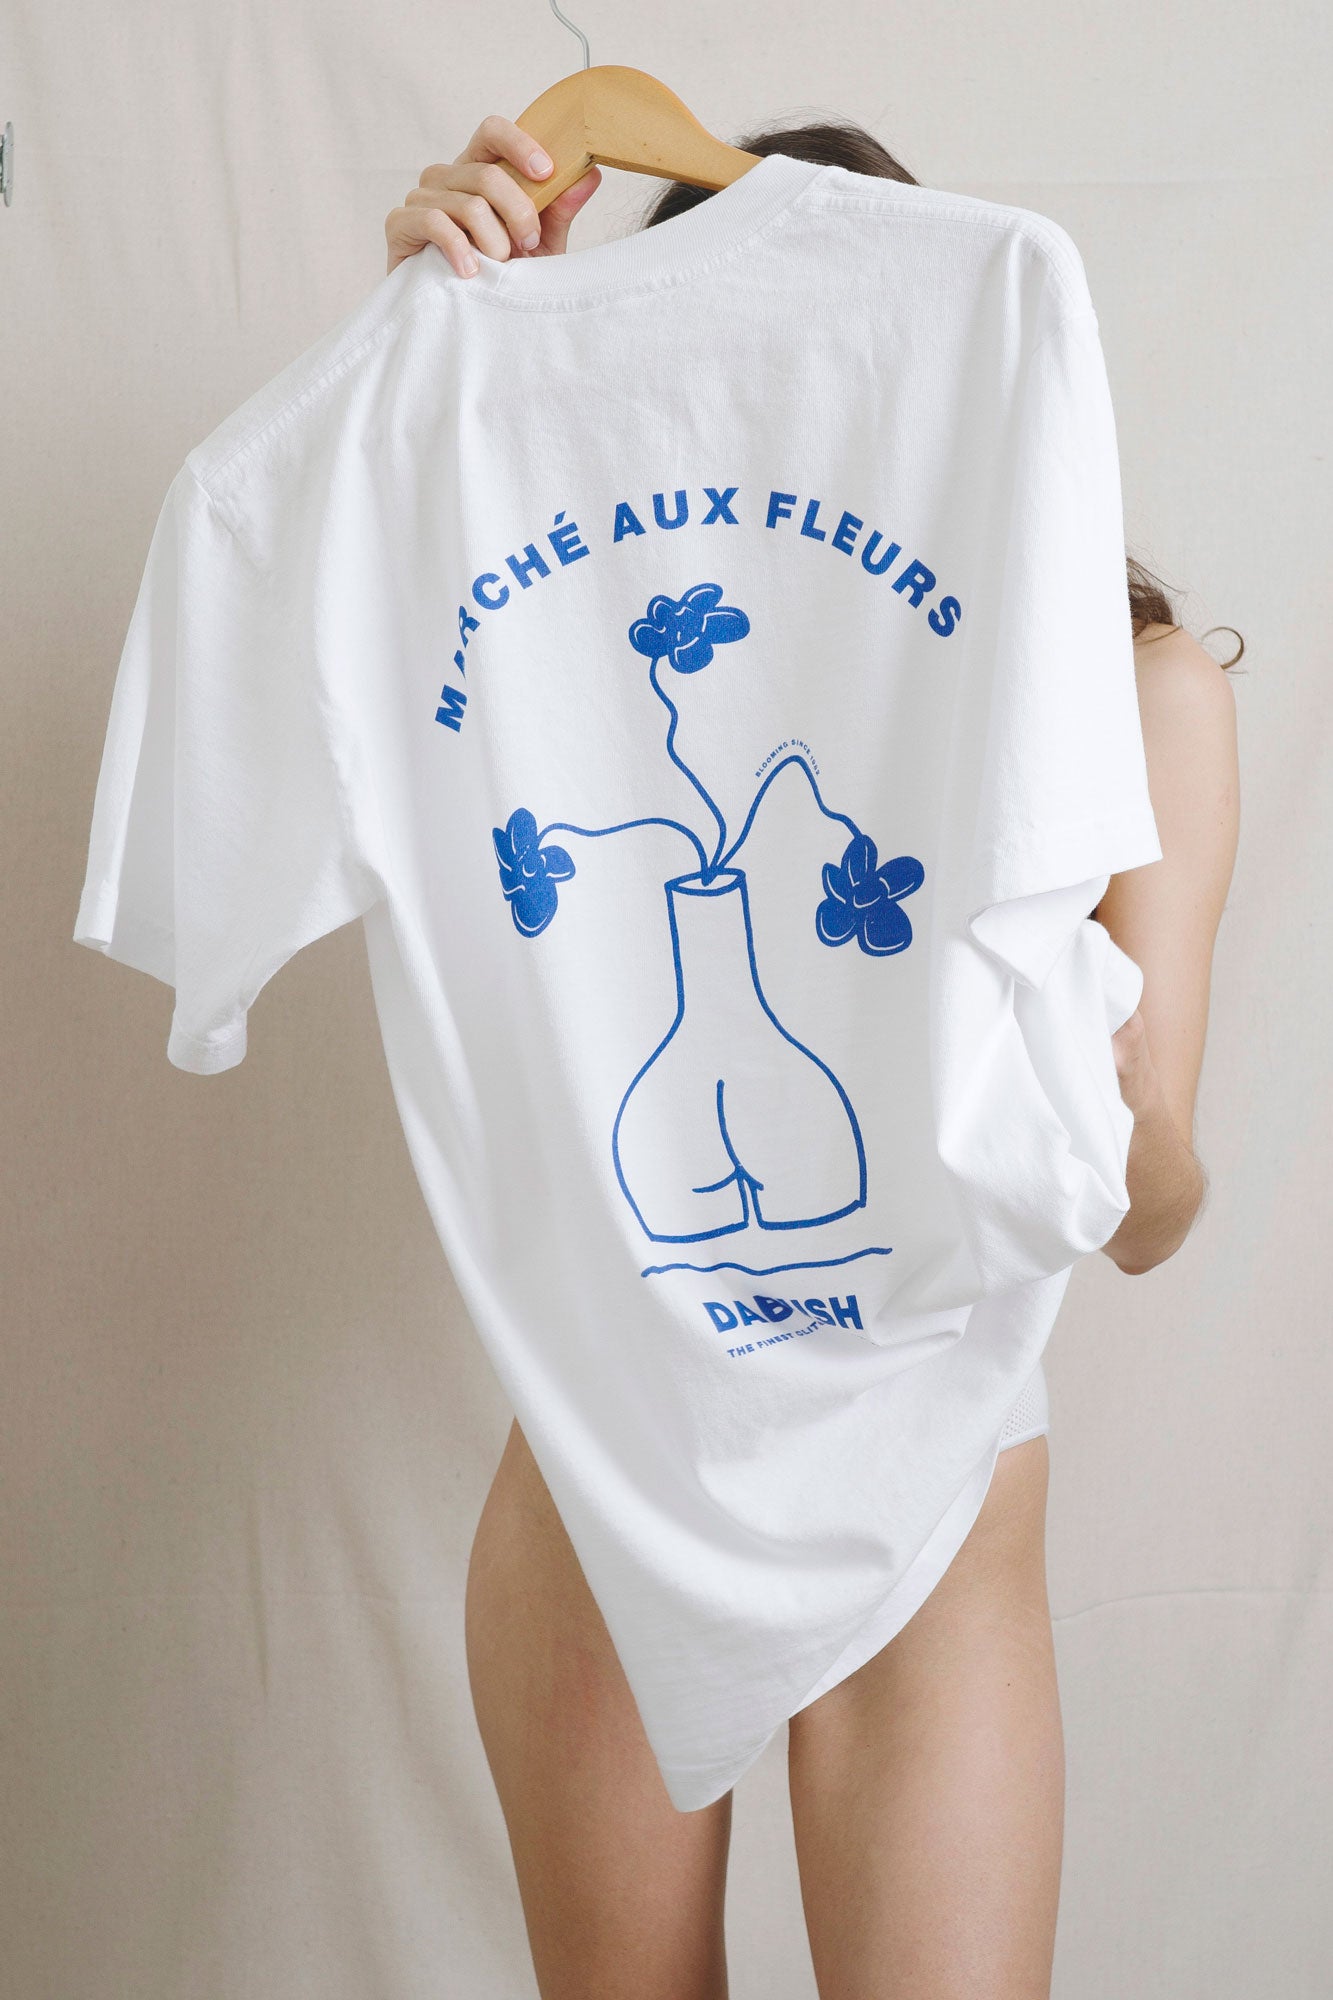 DABUSH FLOWER MARKET T-SHIRT. Marché aux fleurs le tée-shirt. 100% Cotton, oversized tee with back and front print. Made in Tel aviv, Israel.